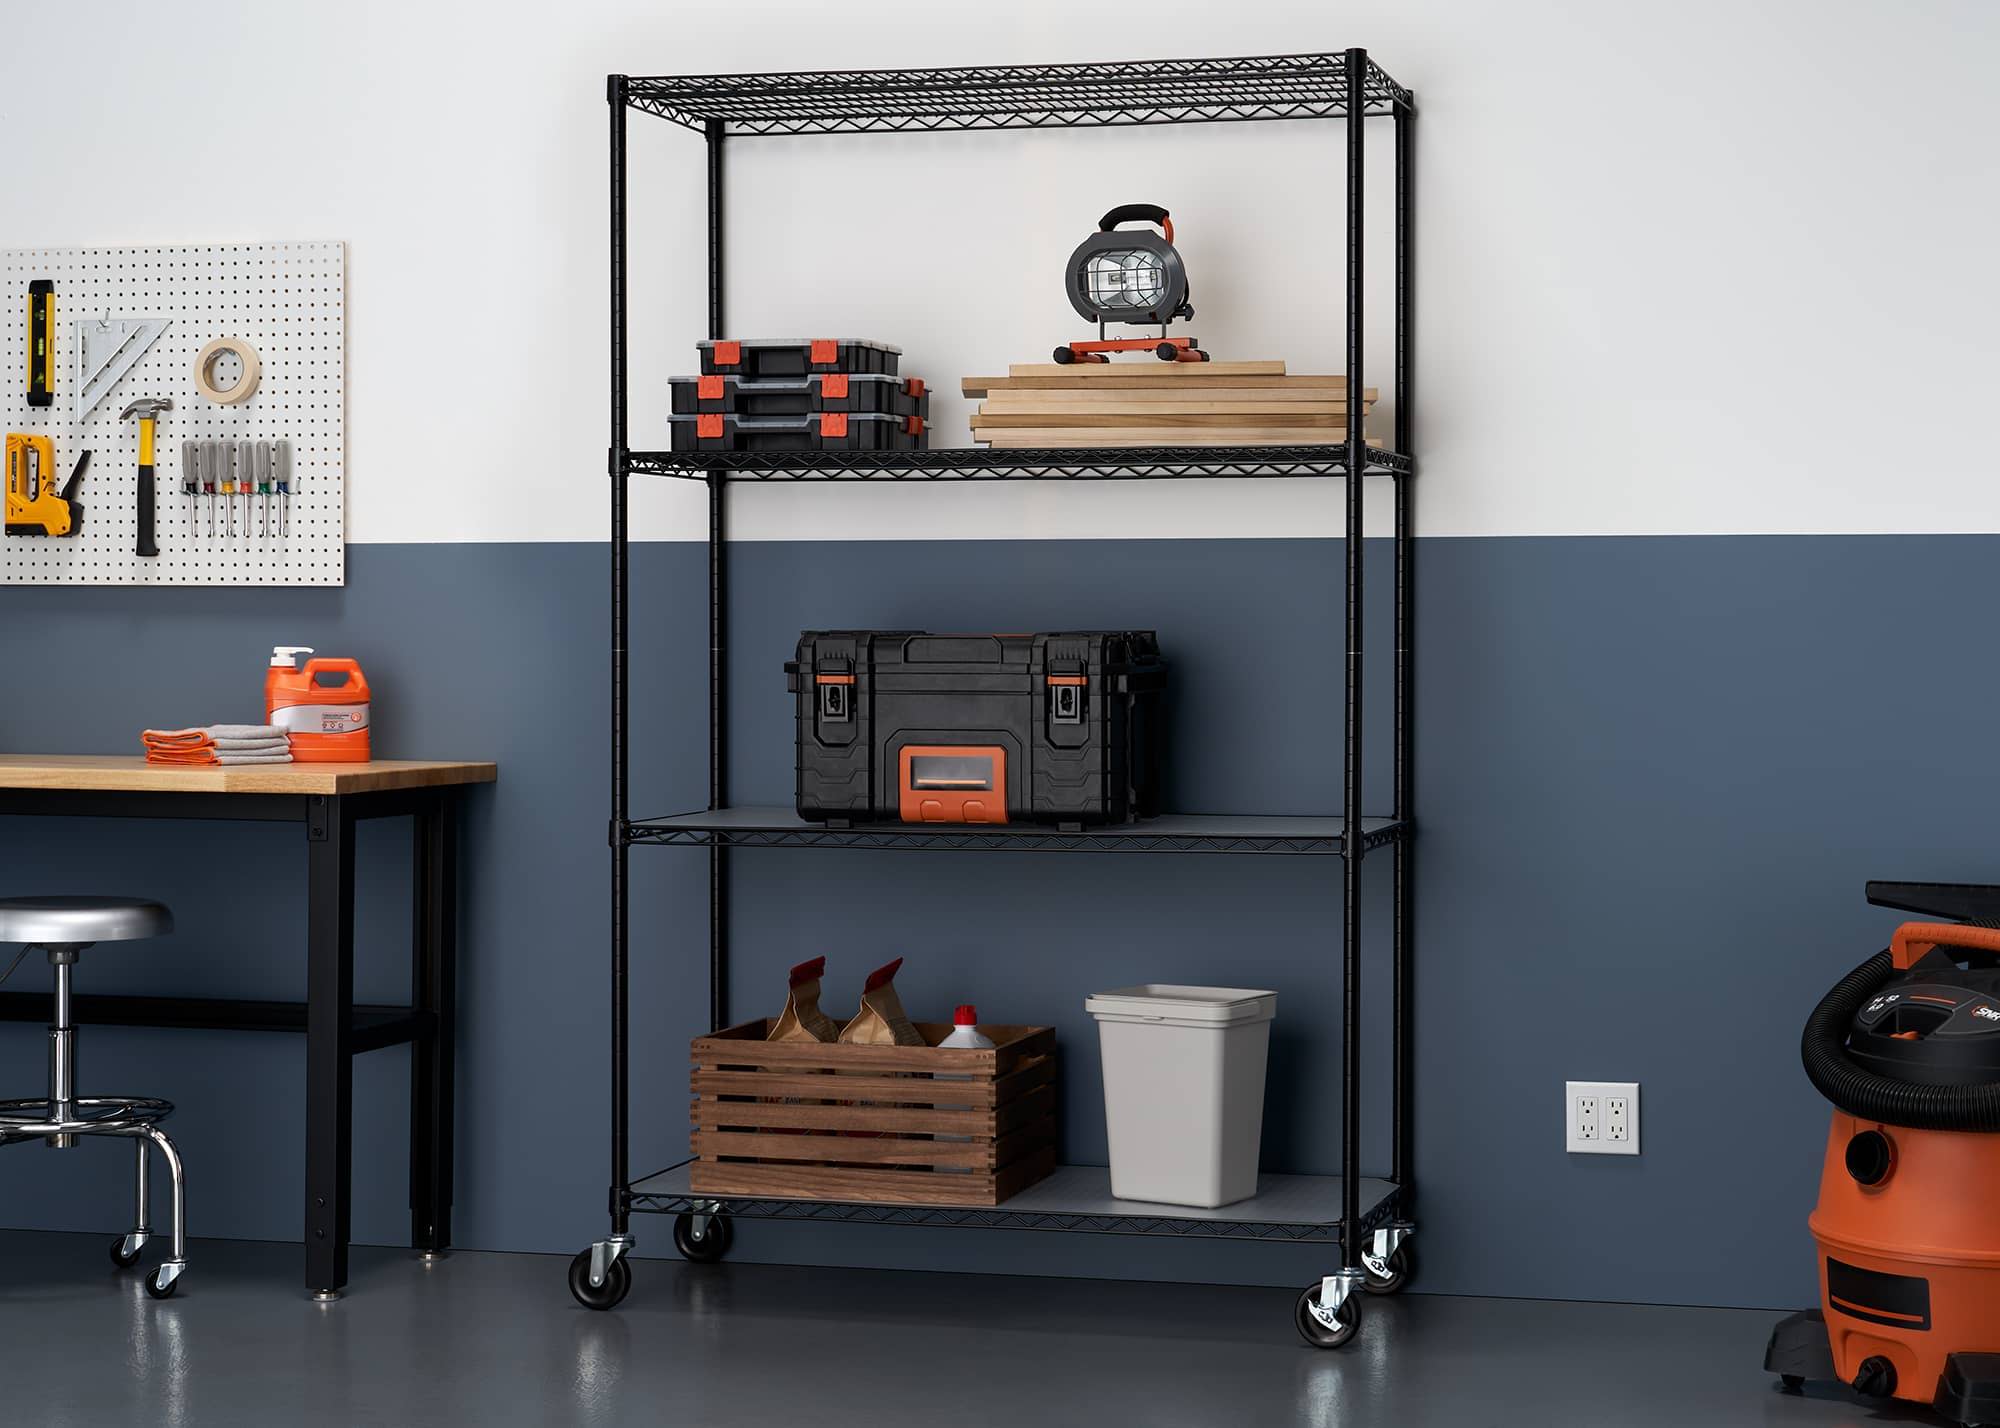 black wire shelving rack in a garage filled with wood working tools and materials